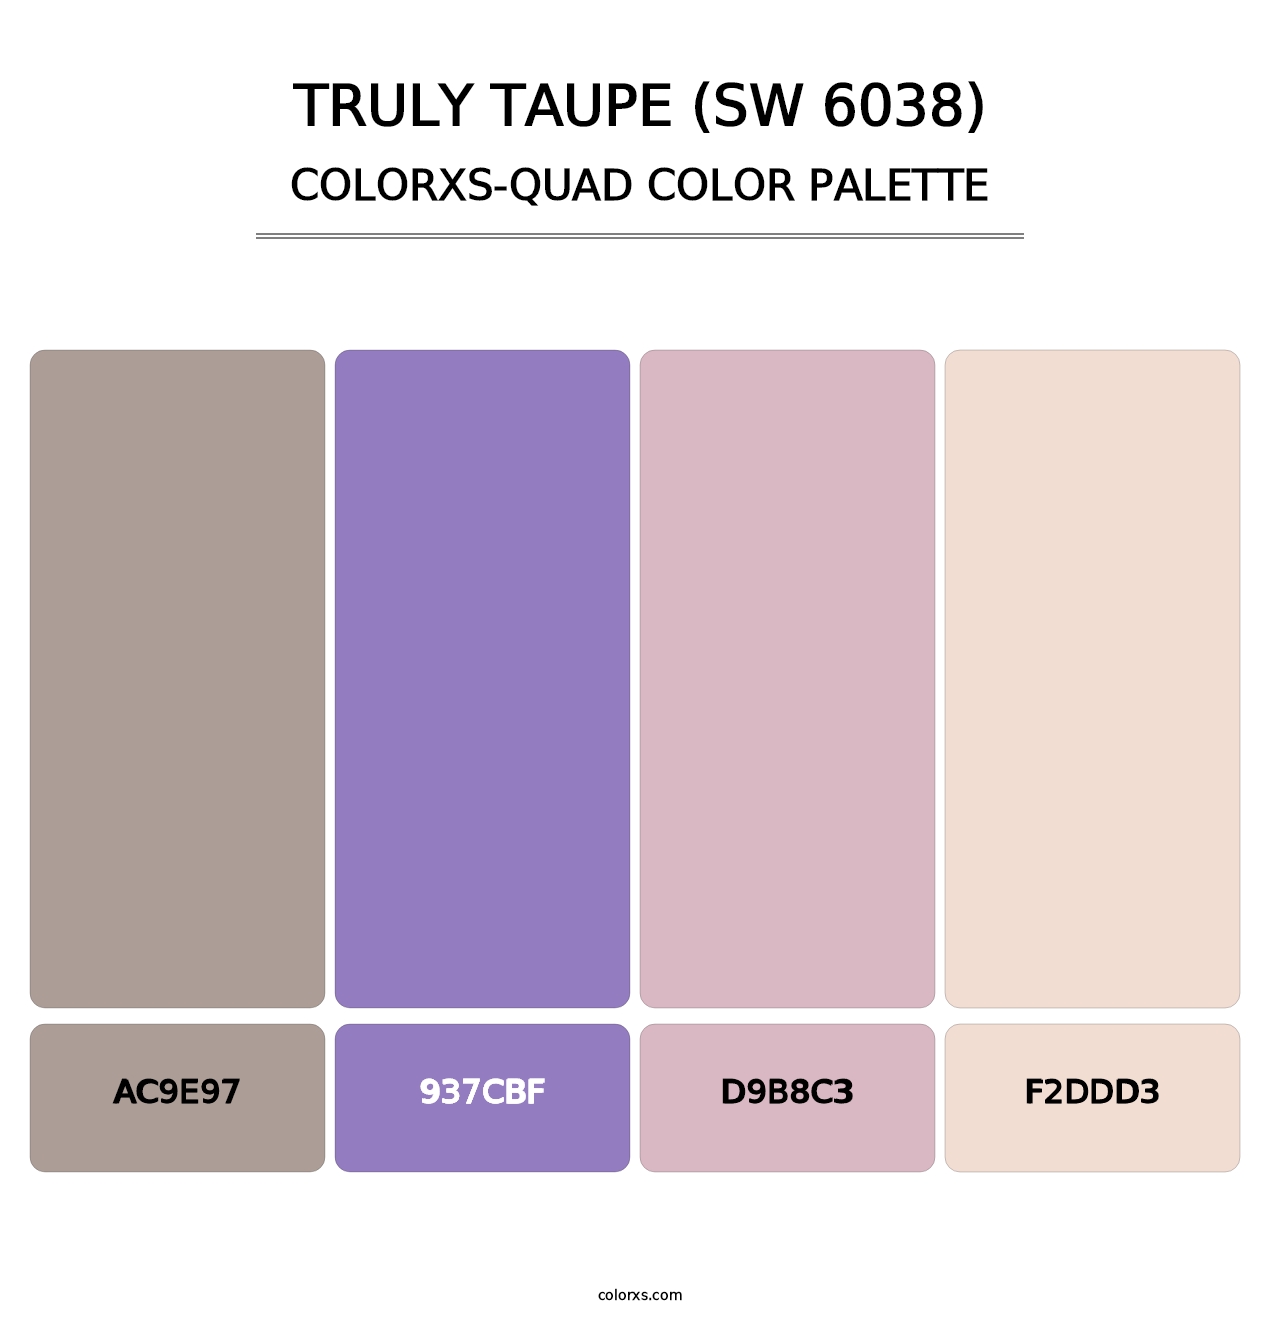 Truly Taupe (SW 6038) - Colorxs Quad Palette